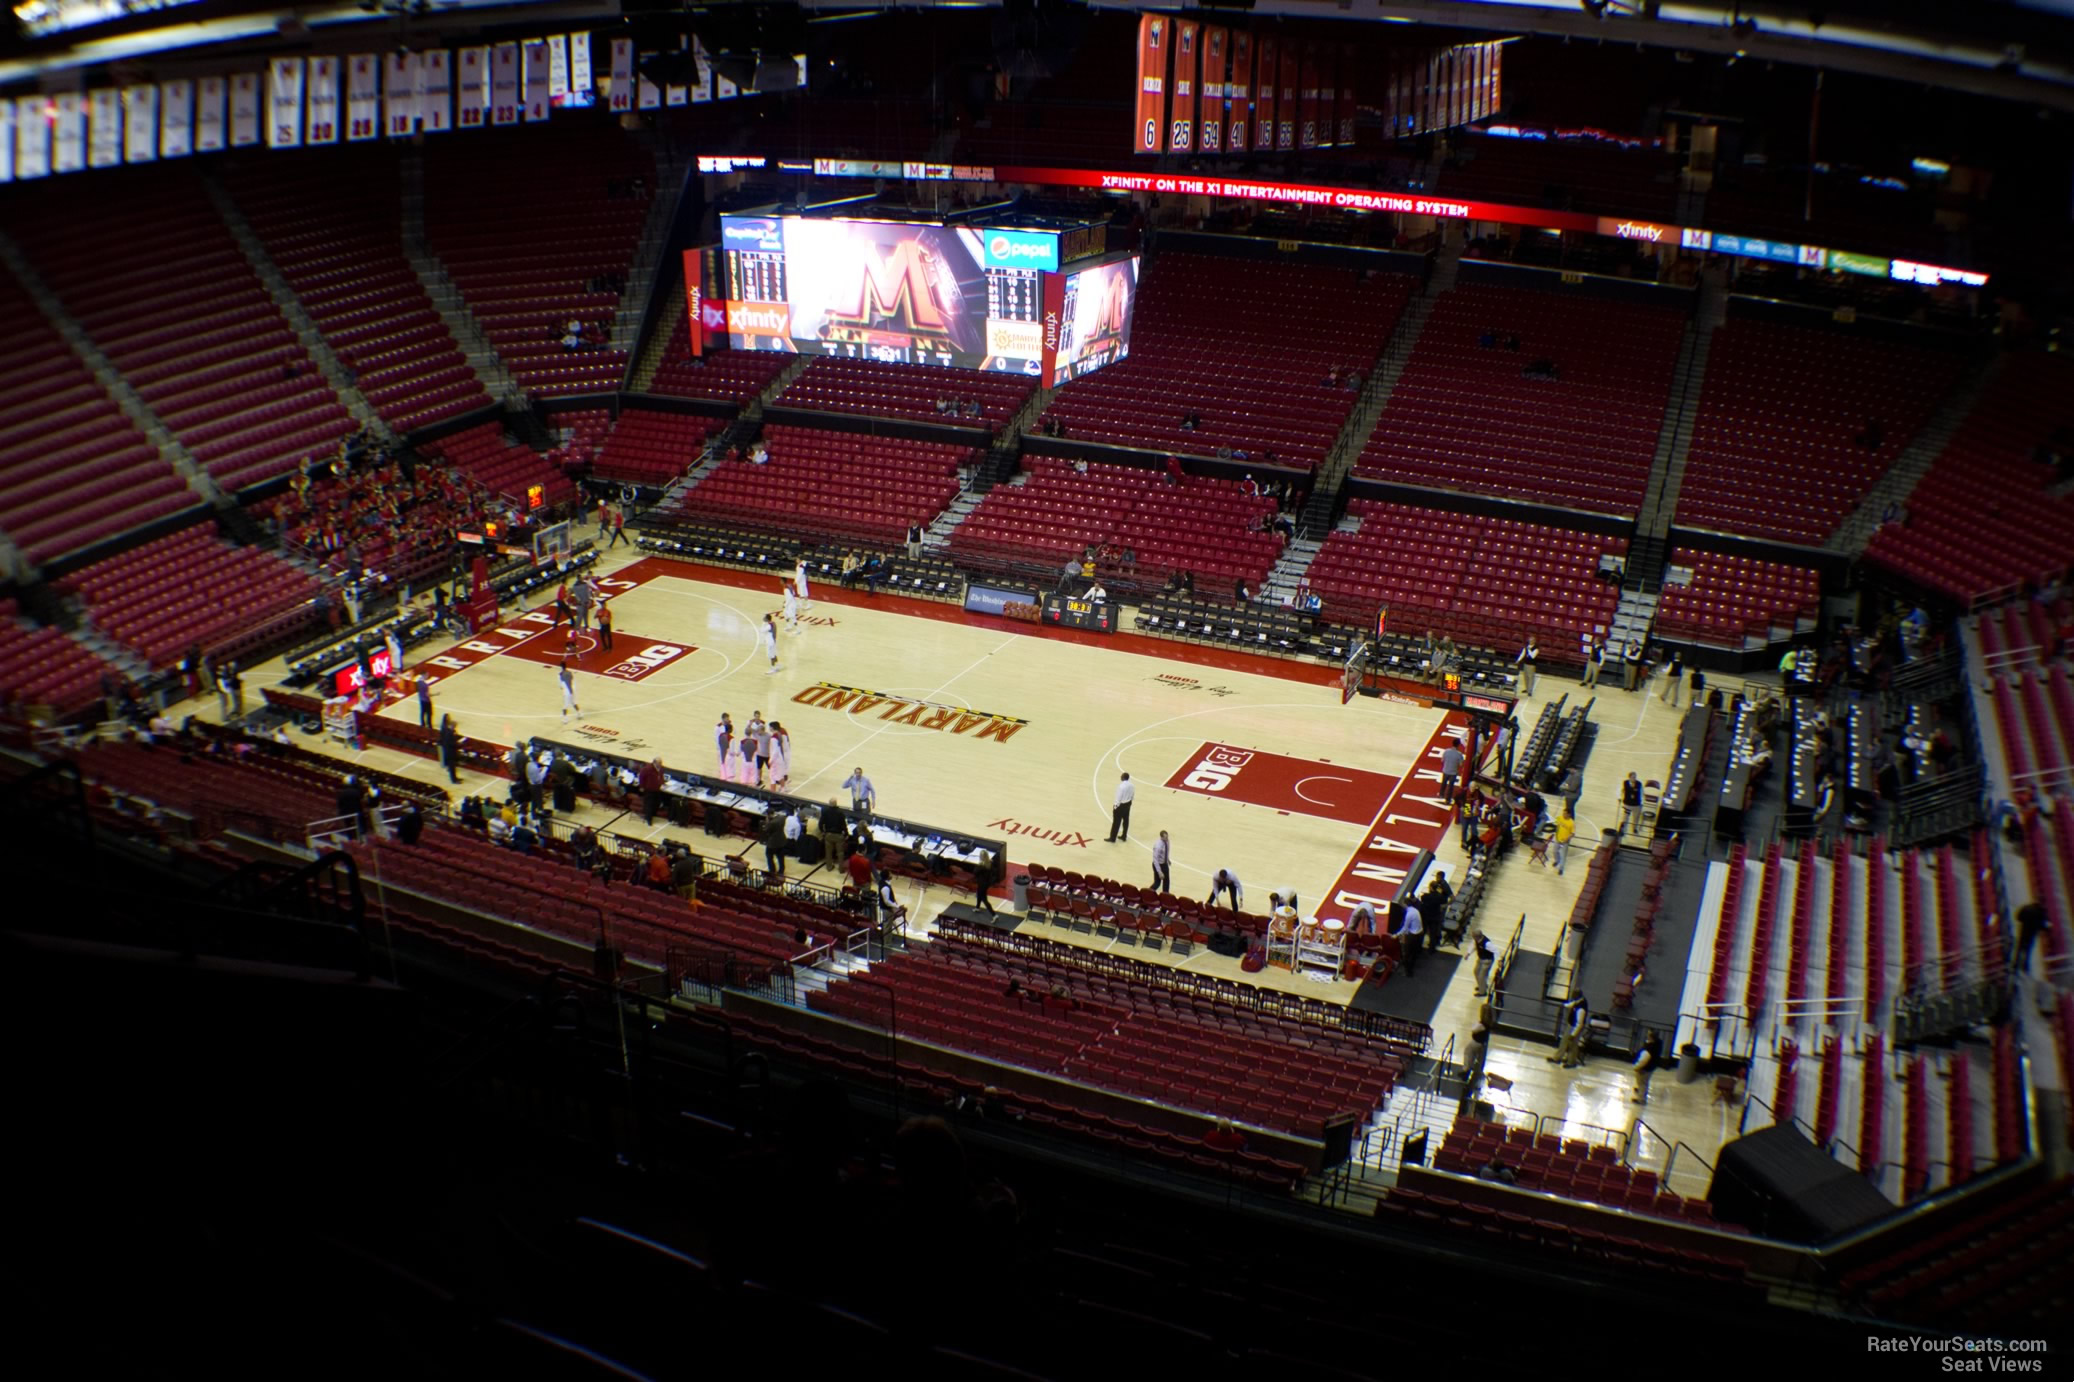 section 203, row 11 seat view  - xfinity center (maryland)